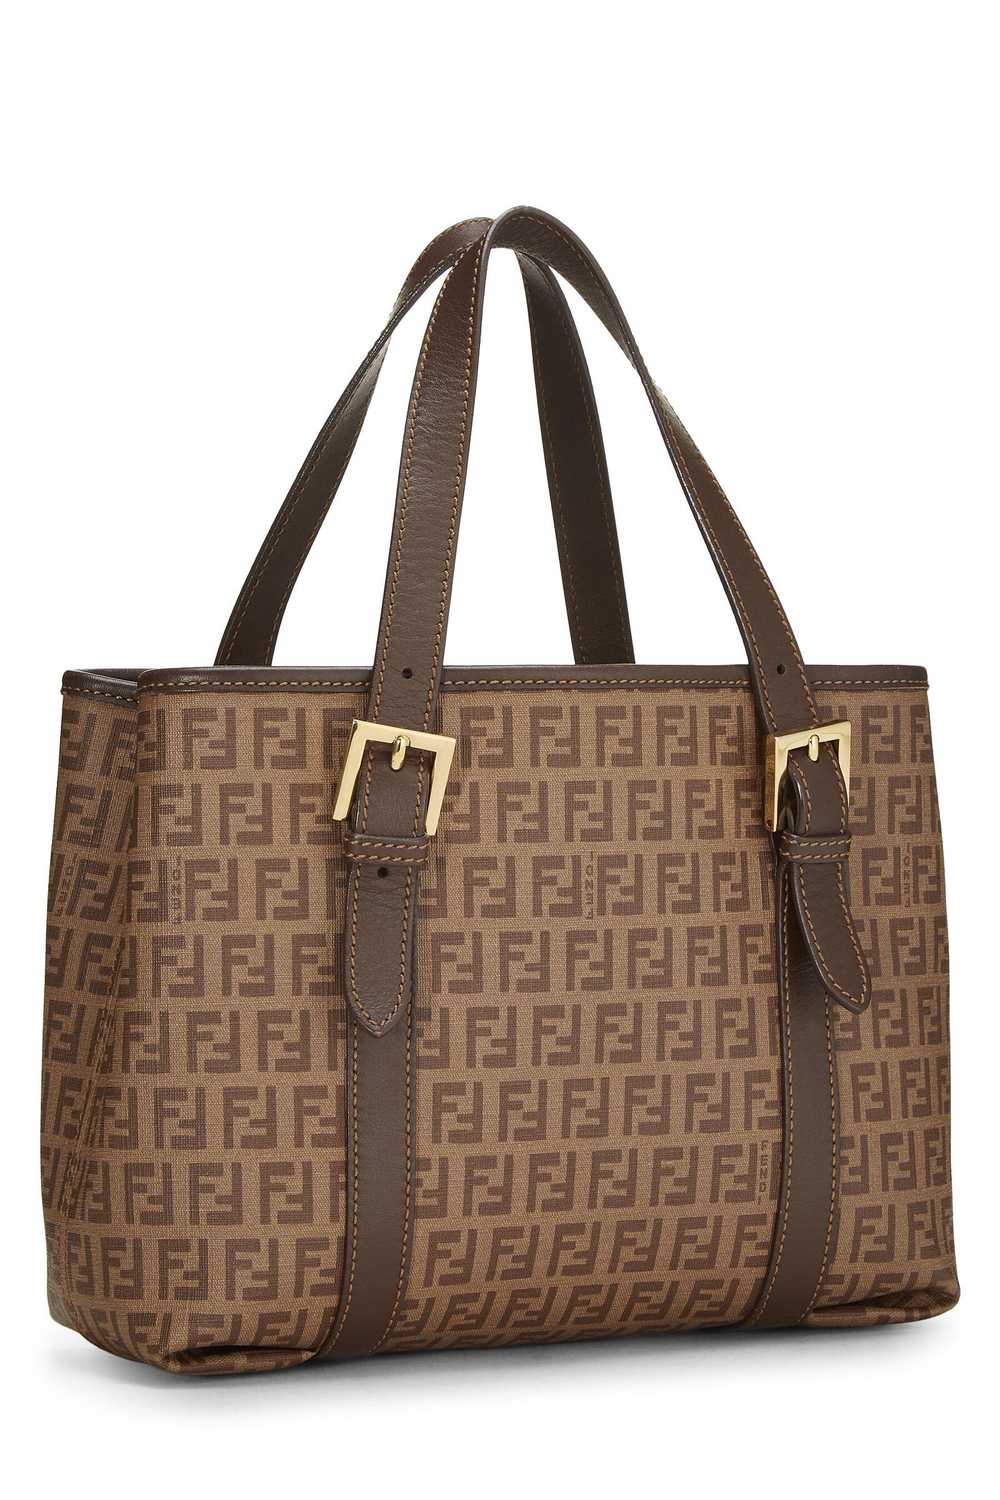 Brown Zucca Coated Canvas Handbag Small - image 2